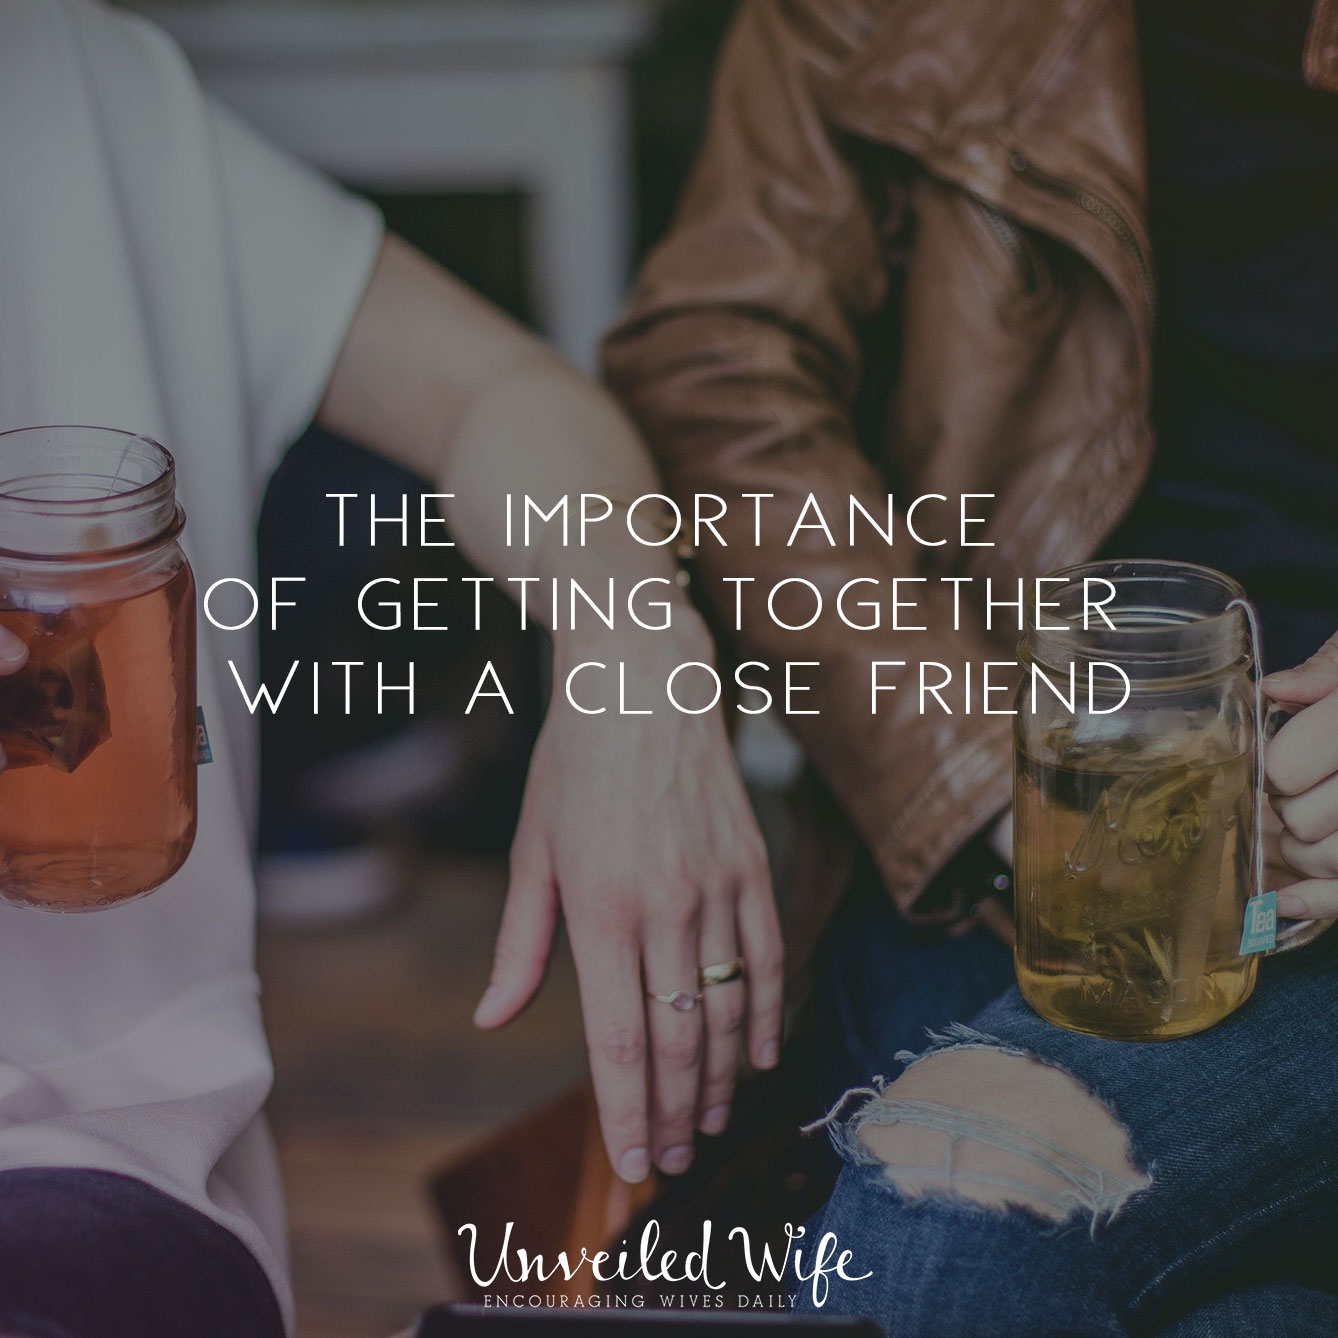 The Importance Of Getting Together With A Close Friend